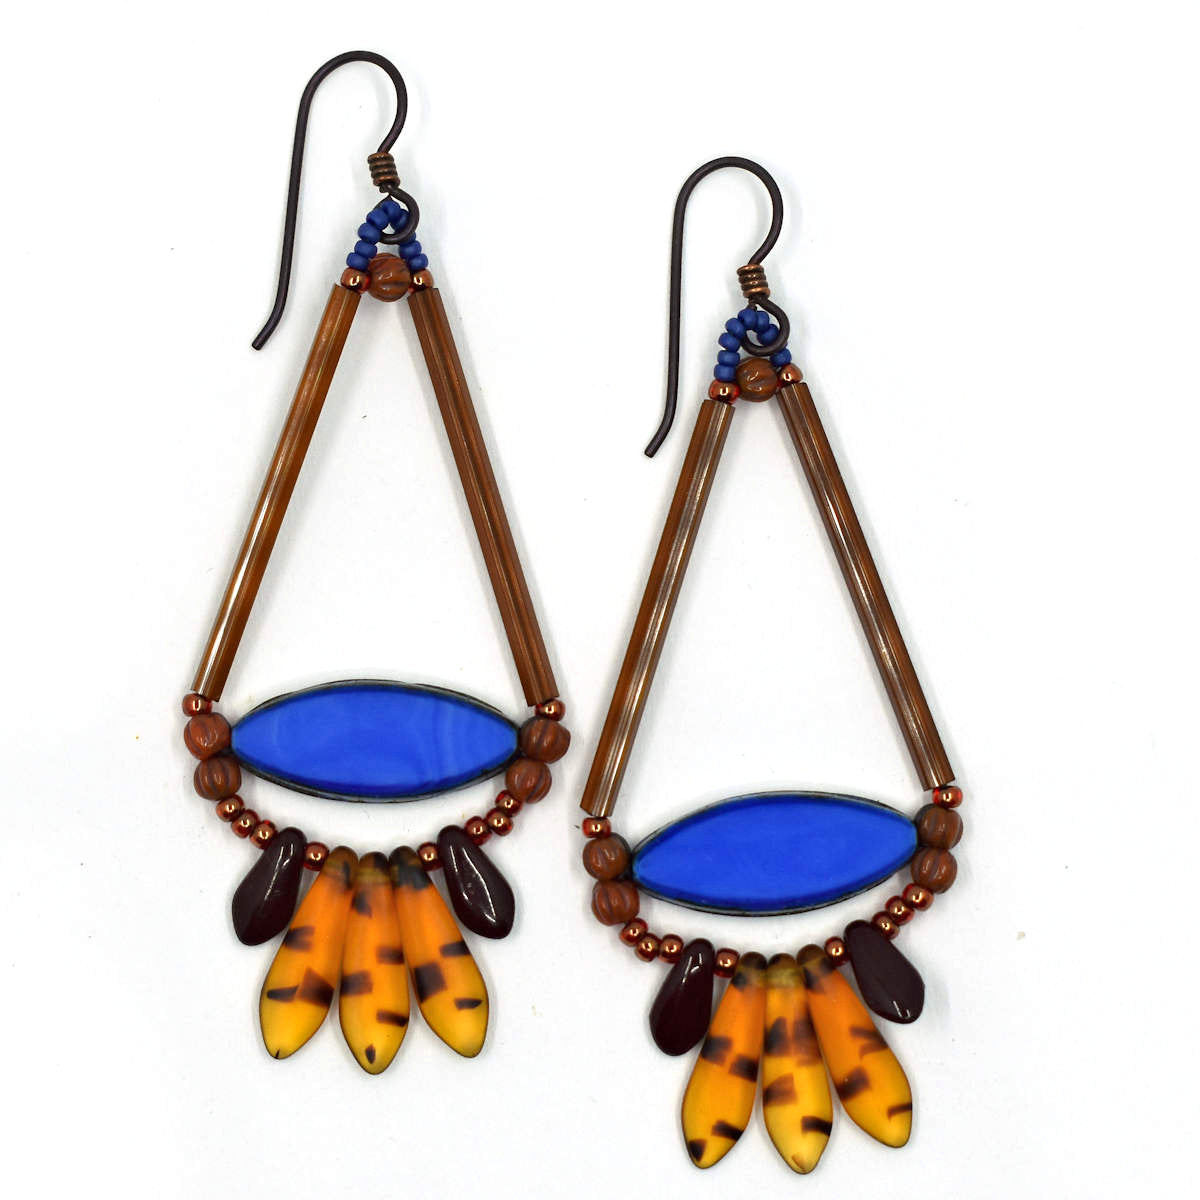 Long gold and amber earrings shaped like a teardrop with a wide medium blue pointy oval at the base lay on a white background. At the bottom of the earrings' teardrop shape is a fan of five dagger beads, three transparent amber tortoiseshell in the center, sandwiched between two smaller dark brown daggers. The earrings have dark ear wires.